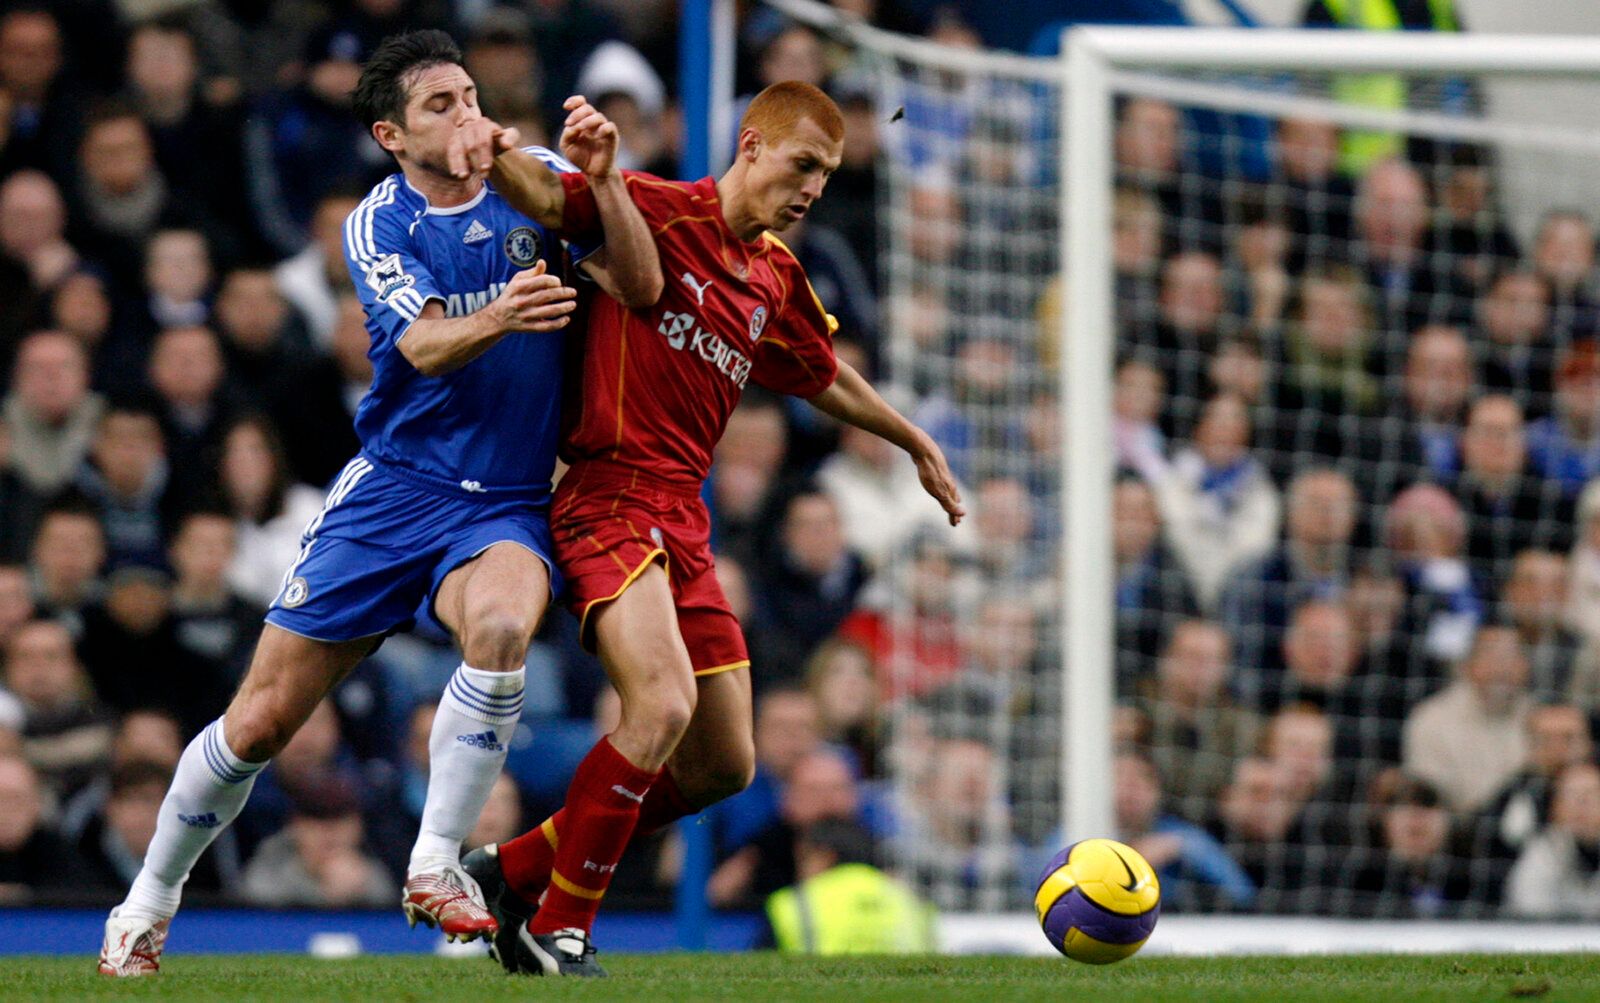 Chelsea's Frank Lampard (L) challenges Reading's Steve Sidwell during their English Premier League soccer match at Stamford Bridge in London December 26, 2006. NO ONLINE/INTERNET USE WITHOUT A LICENCE FROM THE FOOTBALL DATA CO LTD. FOR LICENCE ENQUIRIES PLEASE TELEPHONE +44 (0)207 864 9000.  REUTERS/Alessia Pierdomenico (BRITAIN)